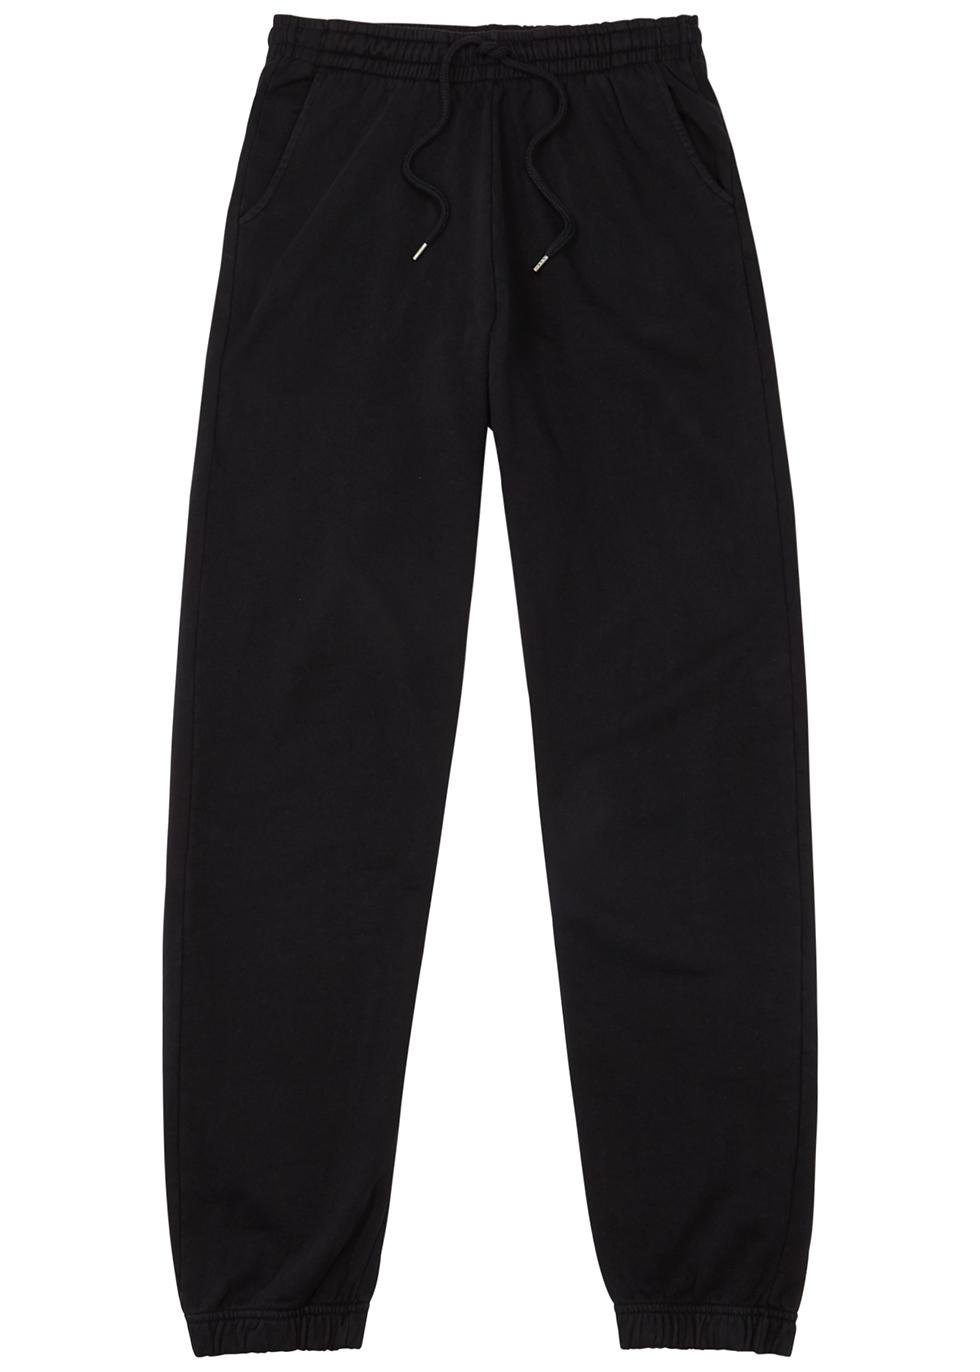 Cotton sweatpants by COLORFUL STANDARD